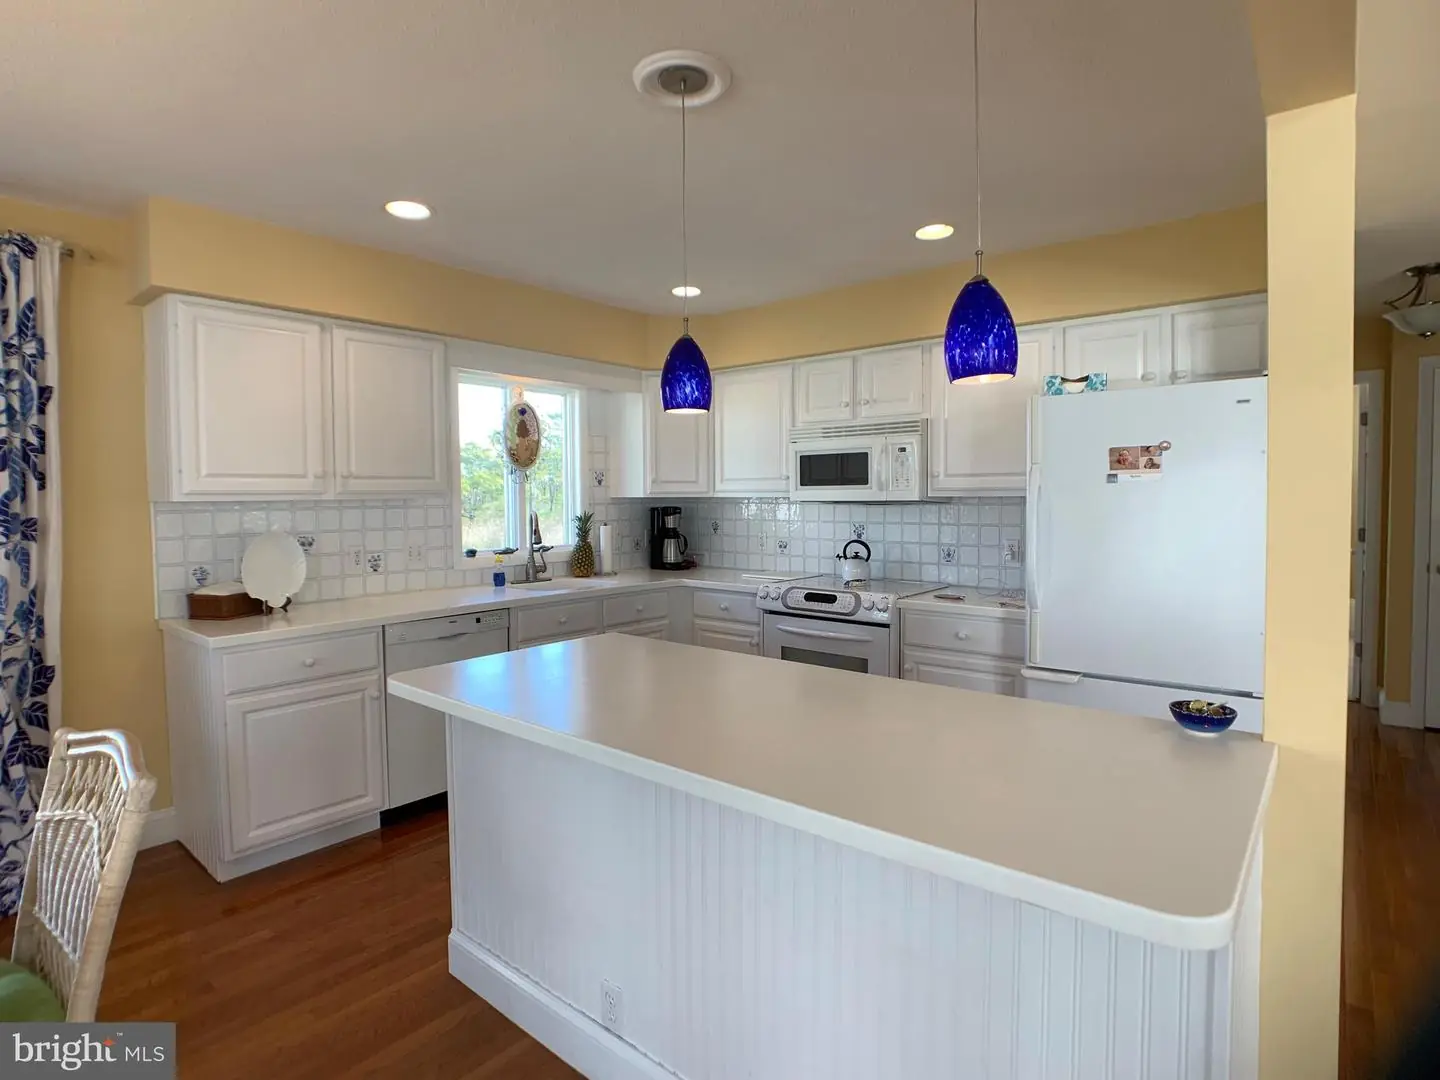 DESU164670-304207560358-2021-07-17-02-03-15 35199 Hassell Ave | Bethany Beach, DE Real Estate For Sale | MLS# Desu164670  - 1st Choice Properties